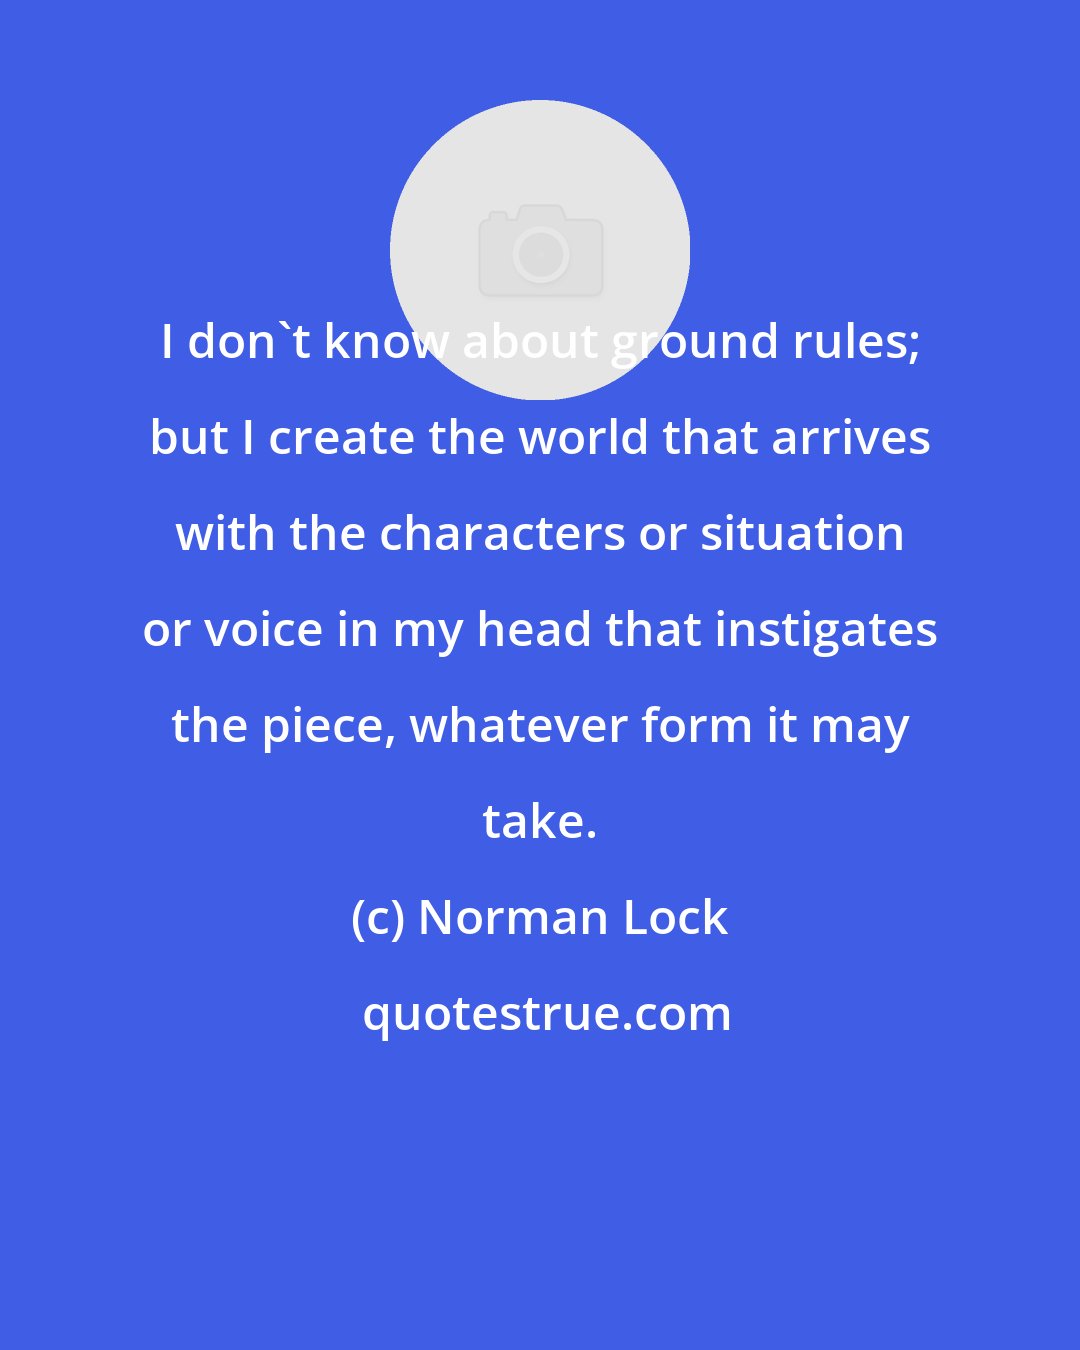 Norman Lock: I don't know about ground rules; but I create the world that arrives with the characters or situation or voice in my head that instigates the piece, whatever form it may take.